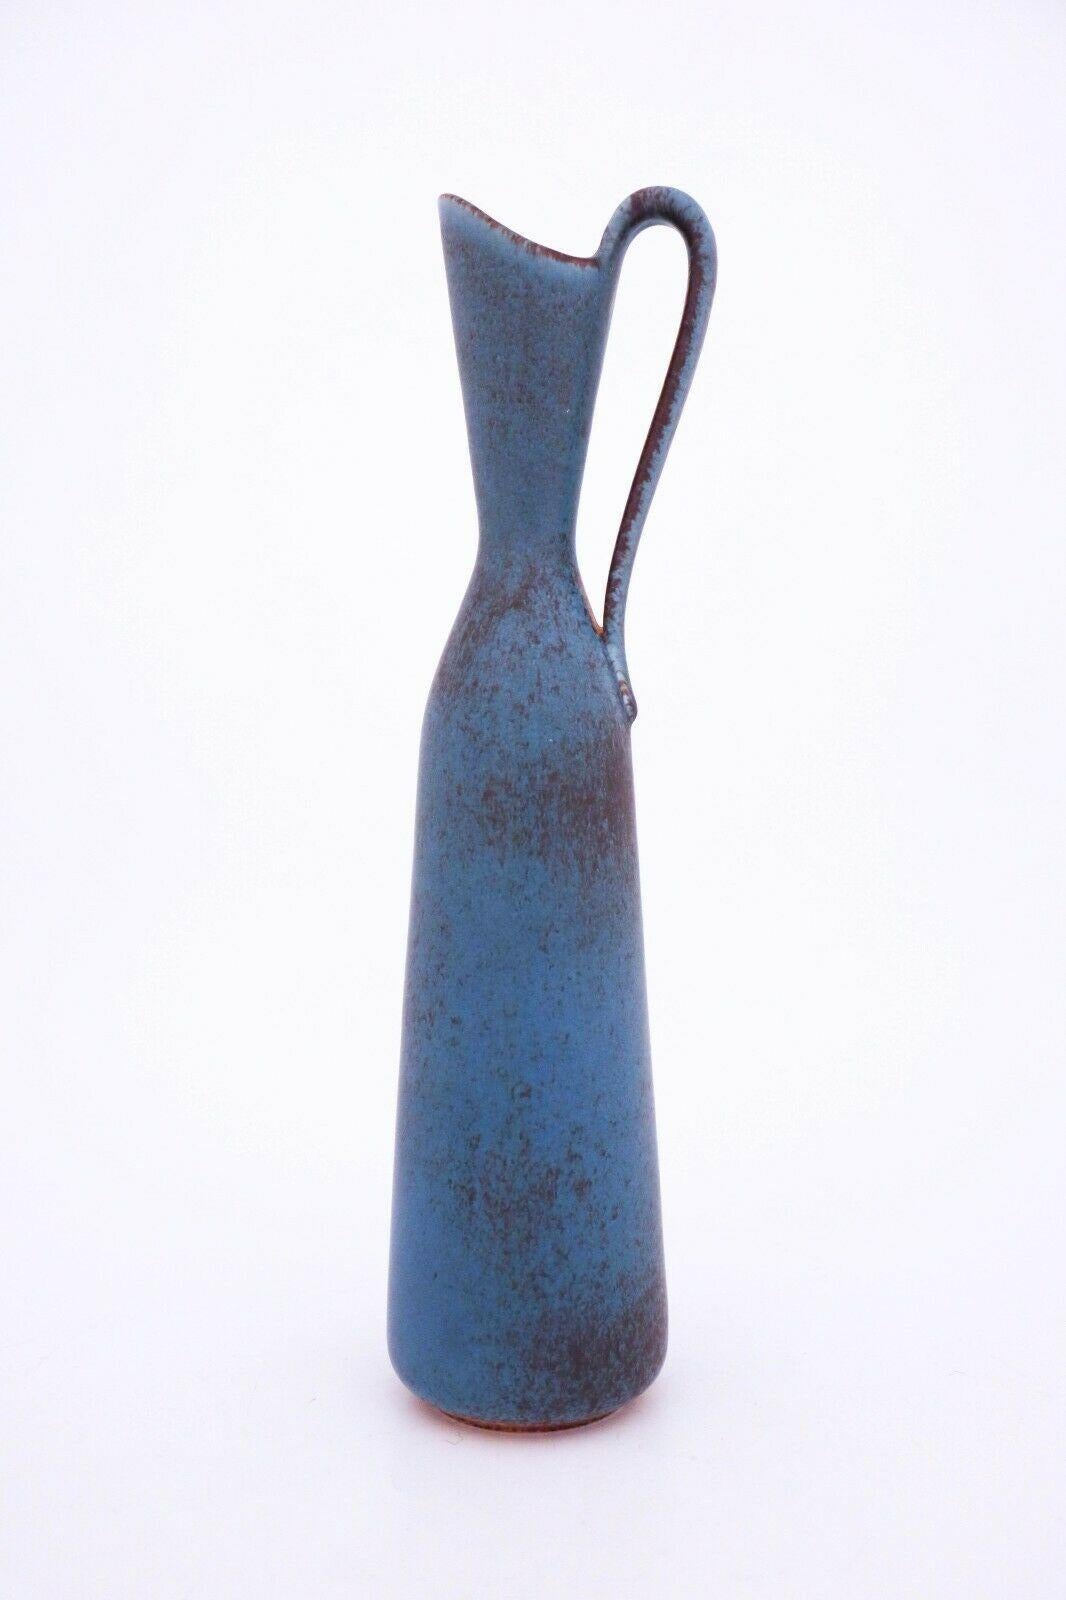 A large vase designed by Gunnar Nylund at Rörstrand. The vase is 36 cm high and in mint condition, it has a beautiful glaze.